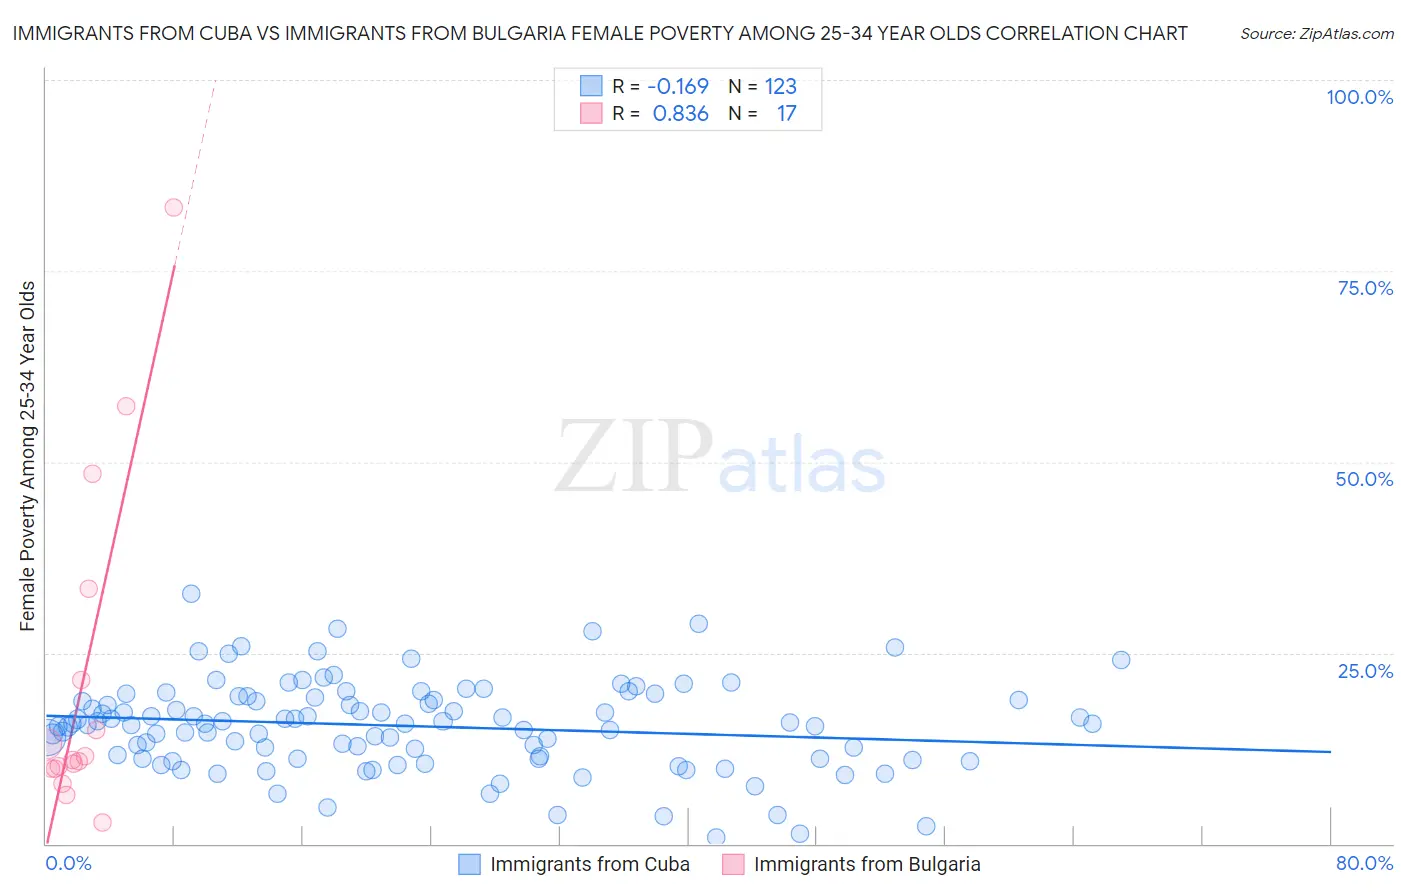 Immigrants from Cuba vs Immigrants from Bulgaria Female Poverty Among 25-34 Year Olds